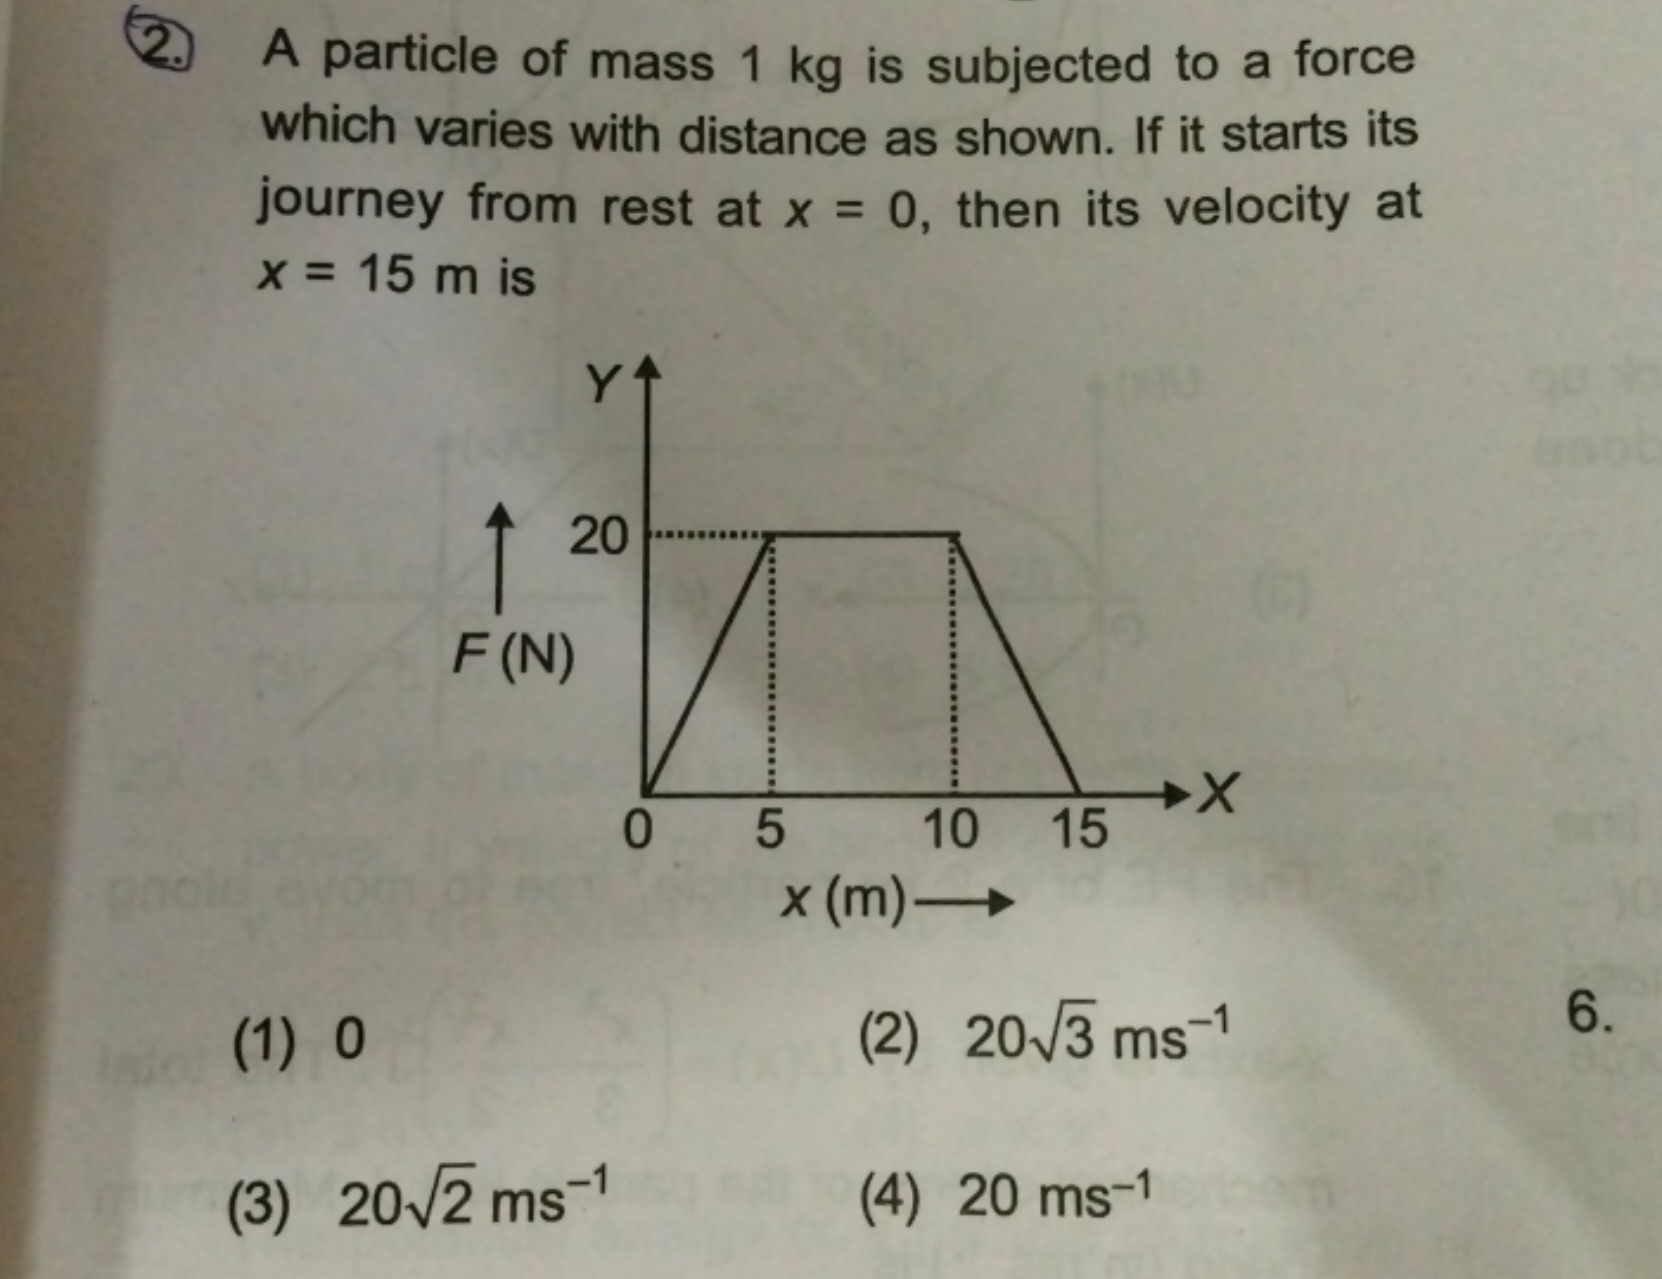 (2.) A particle of mass 1 kg is subjected to a force which varies with